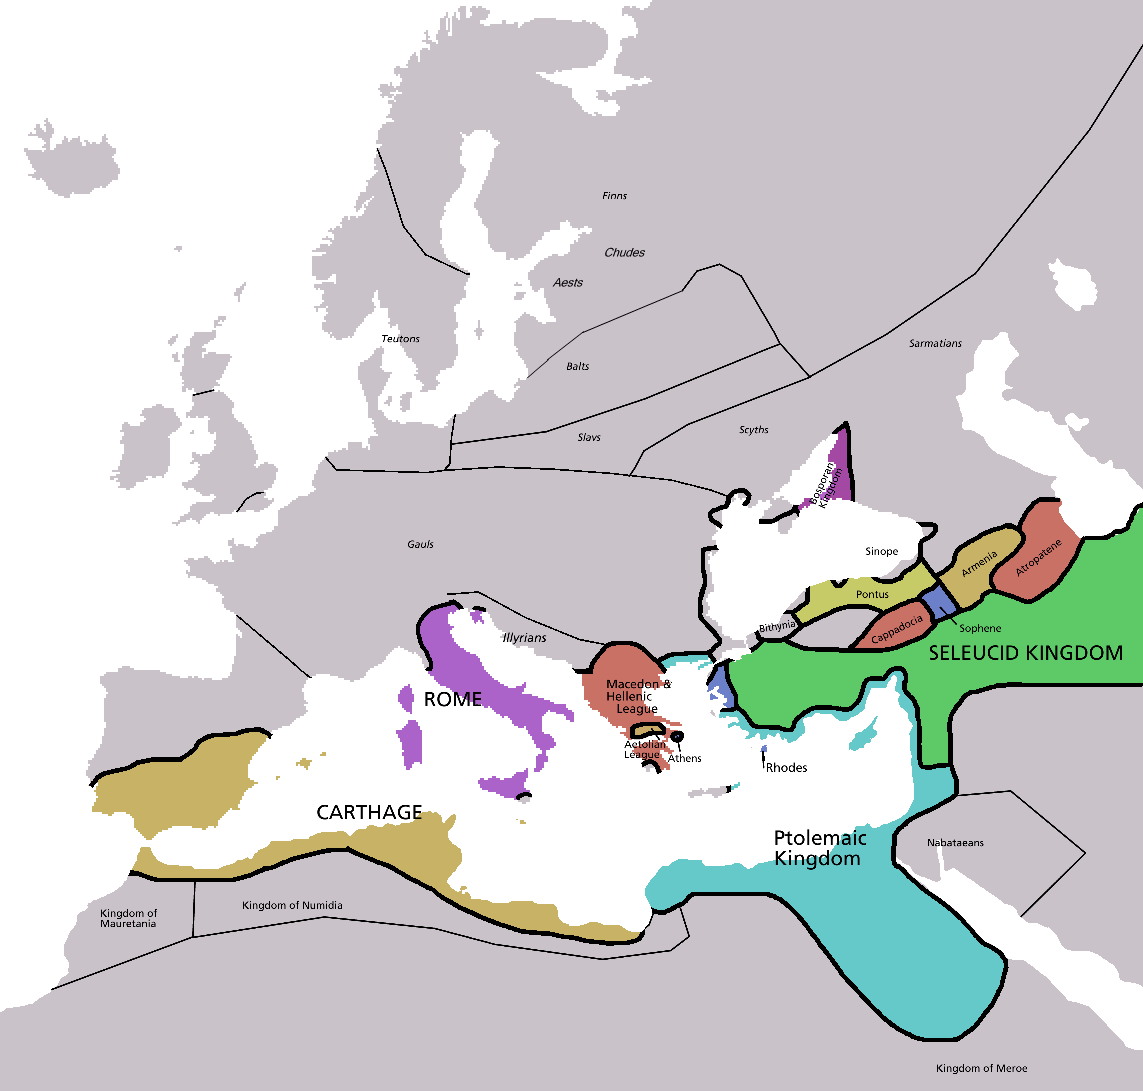 http://upload.wikimedia.org/wikipedia/commons/1/13/Europe_map_220BC.PNG